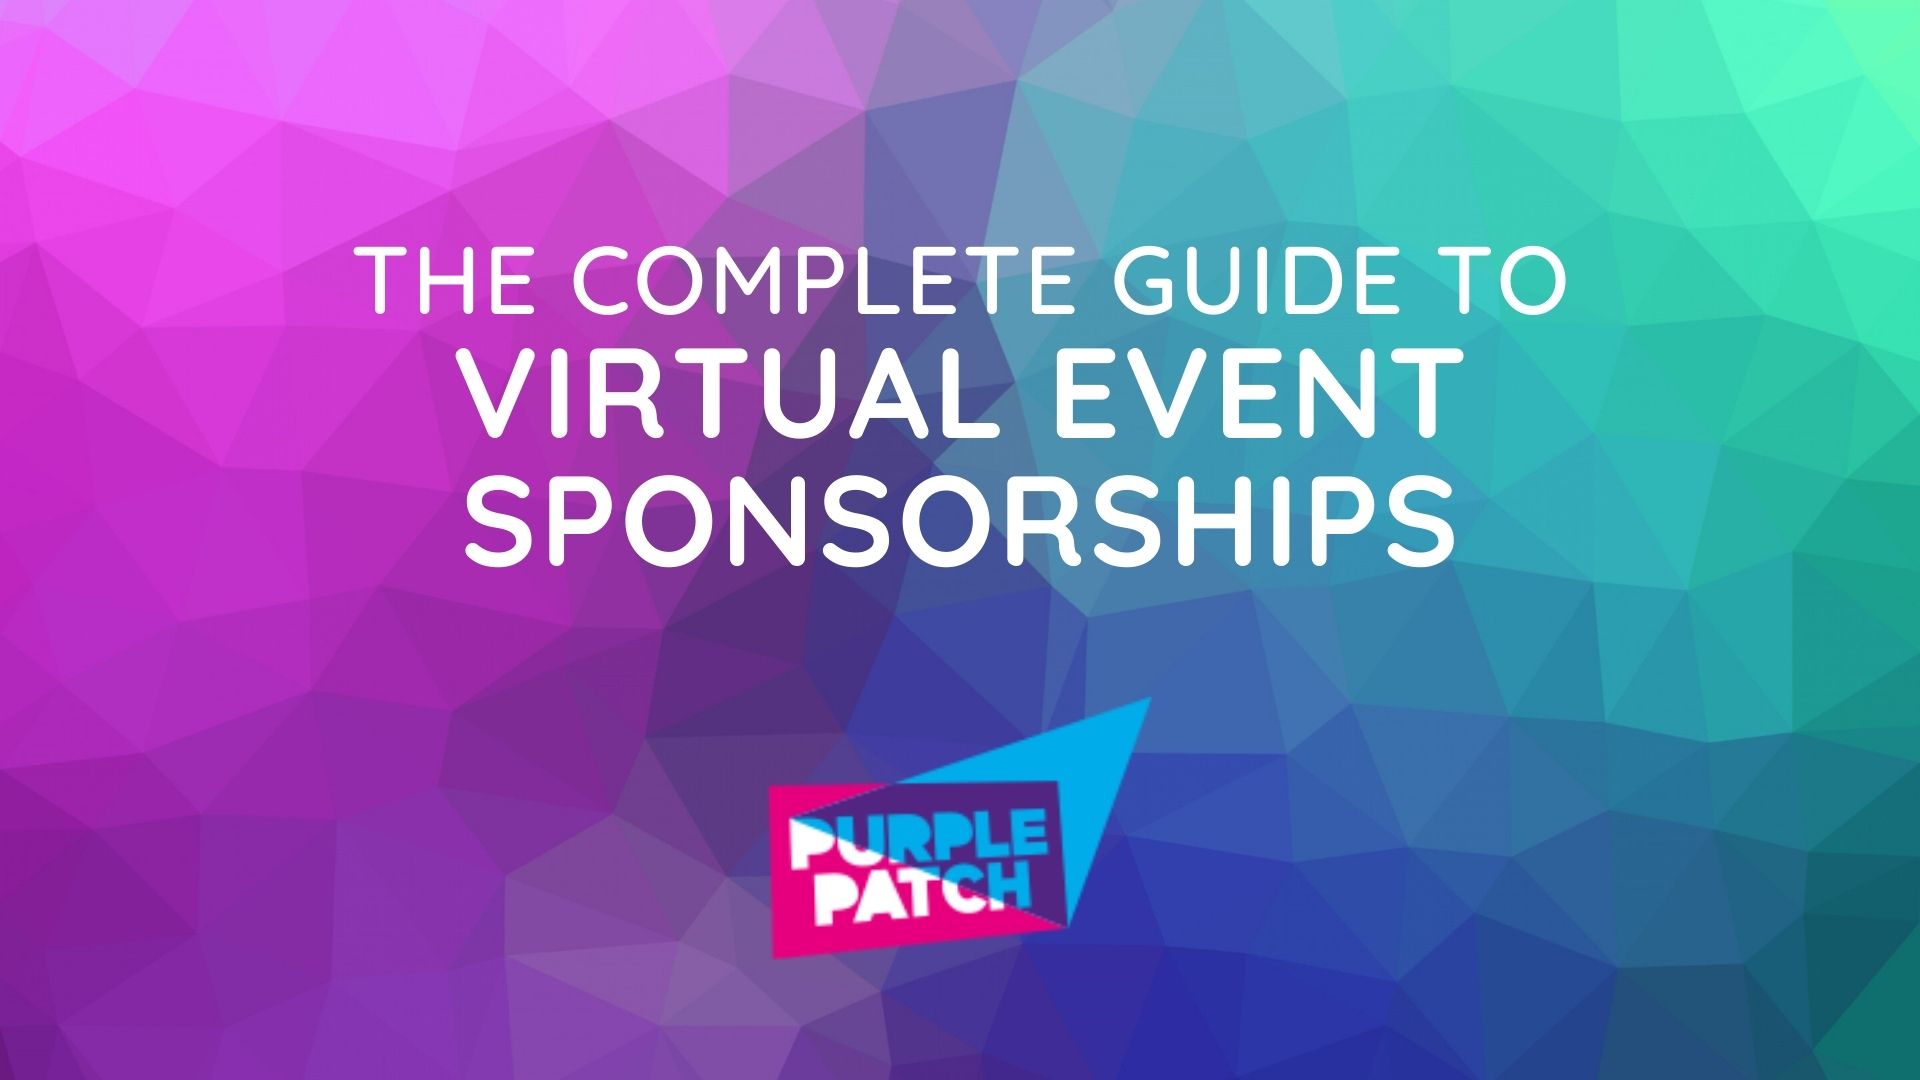 The Complete Guide to Virtual Event Sponsorships